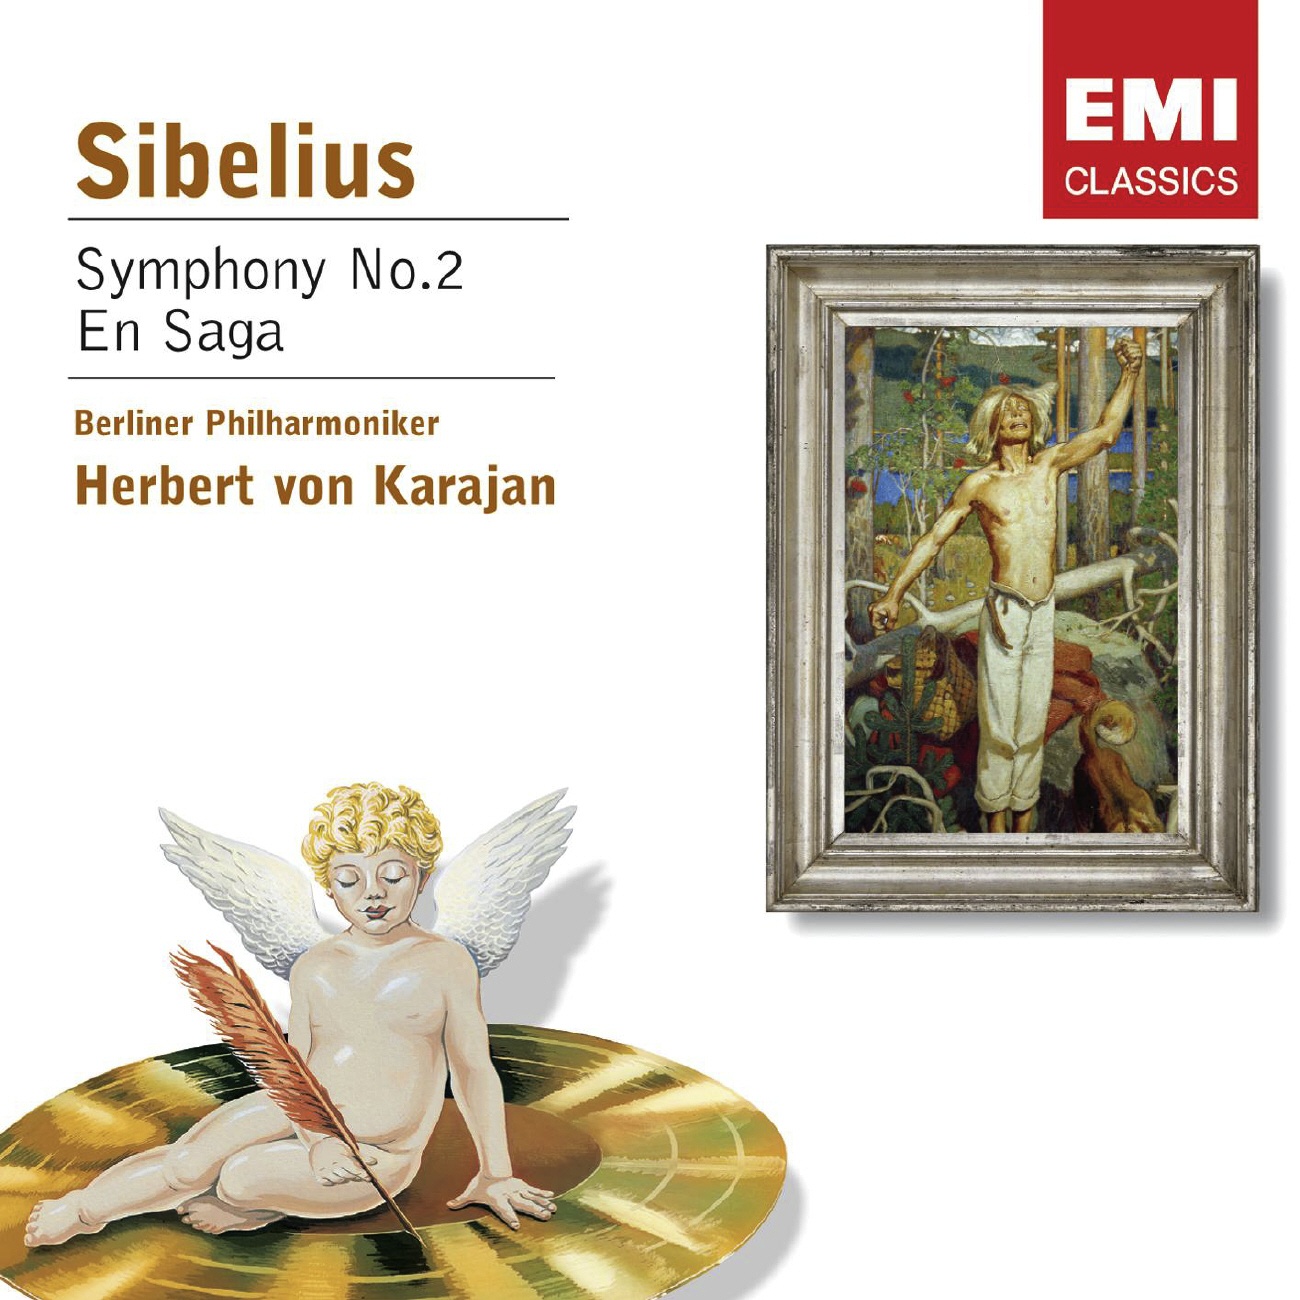 Symphony No. 2 in D Op. 43: IV. Finale (Allegro moderato)